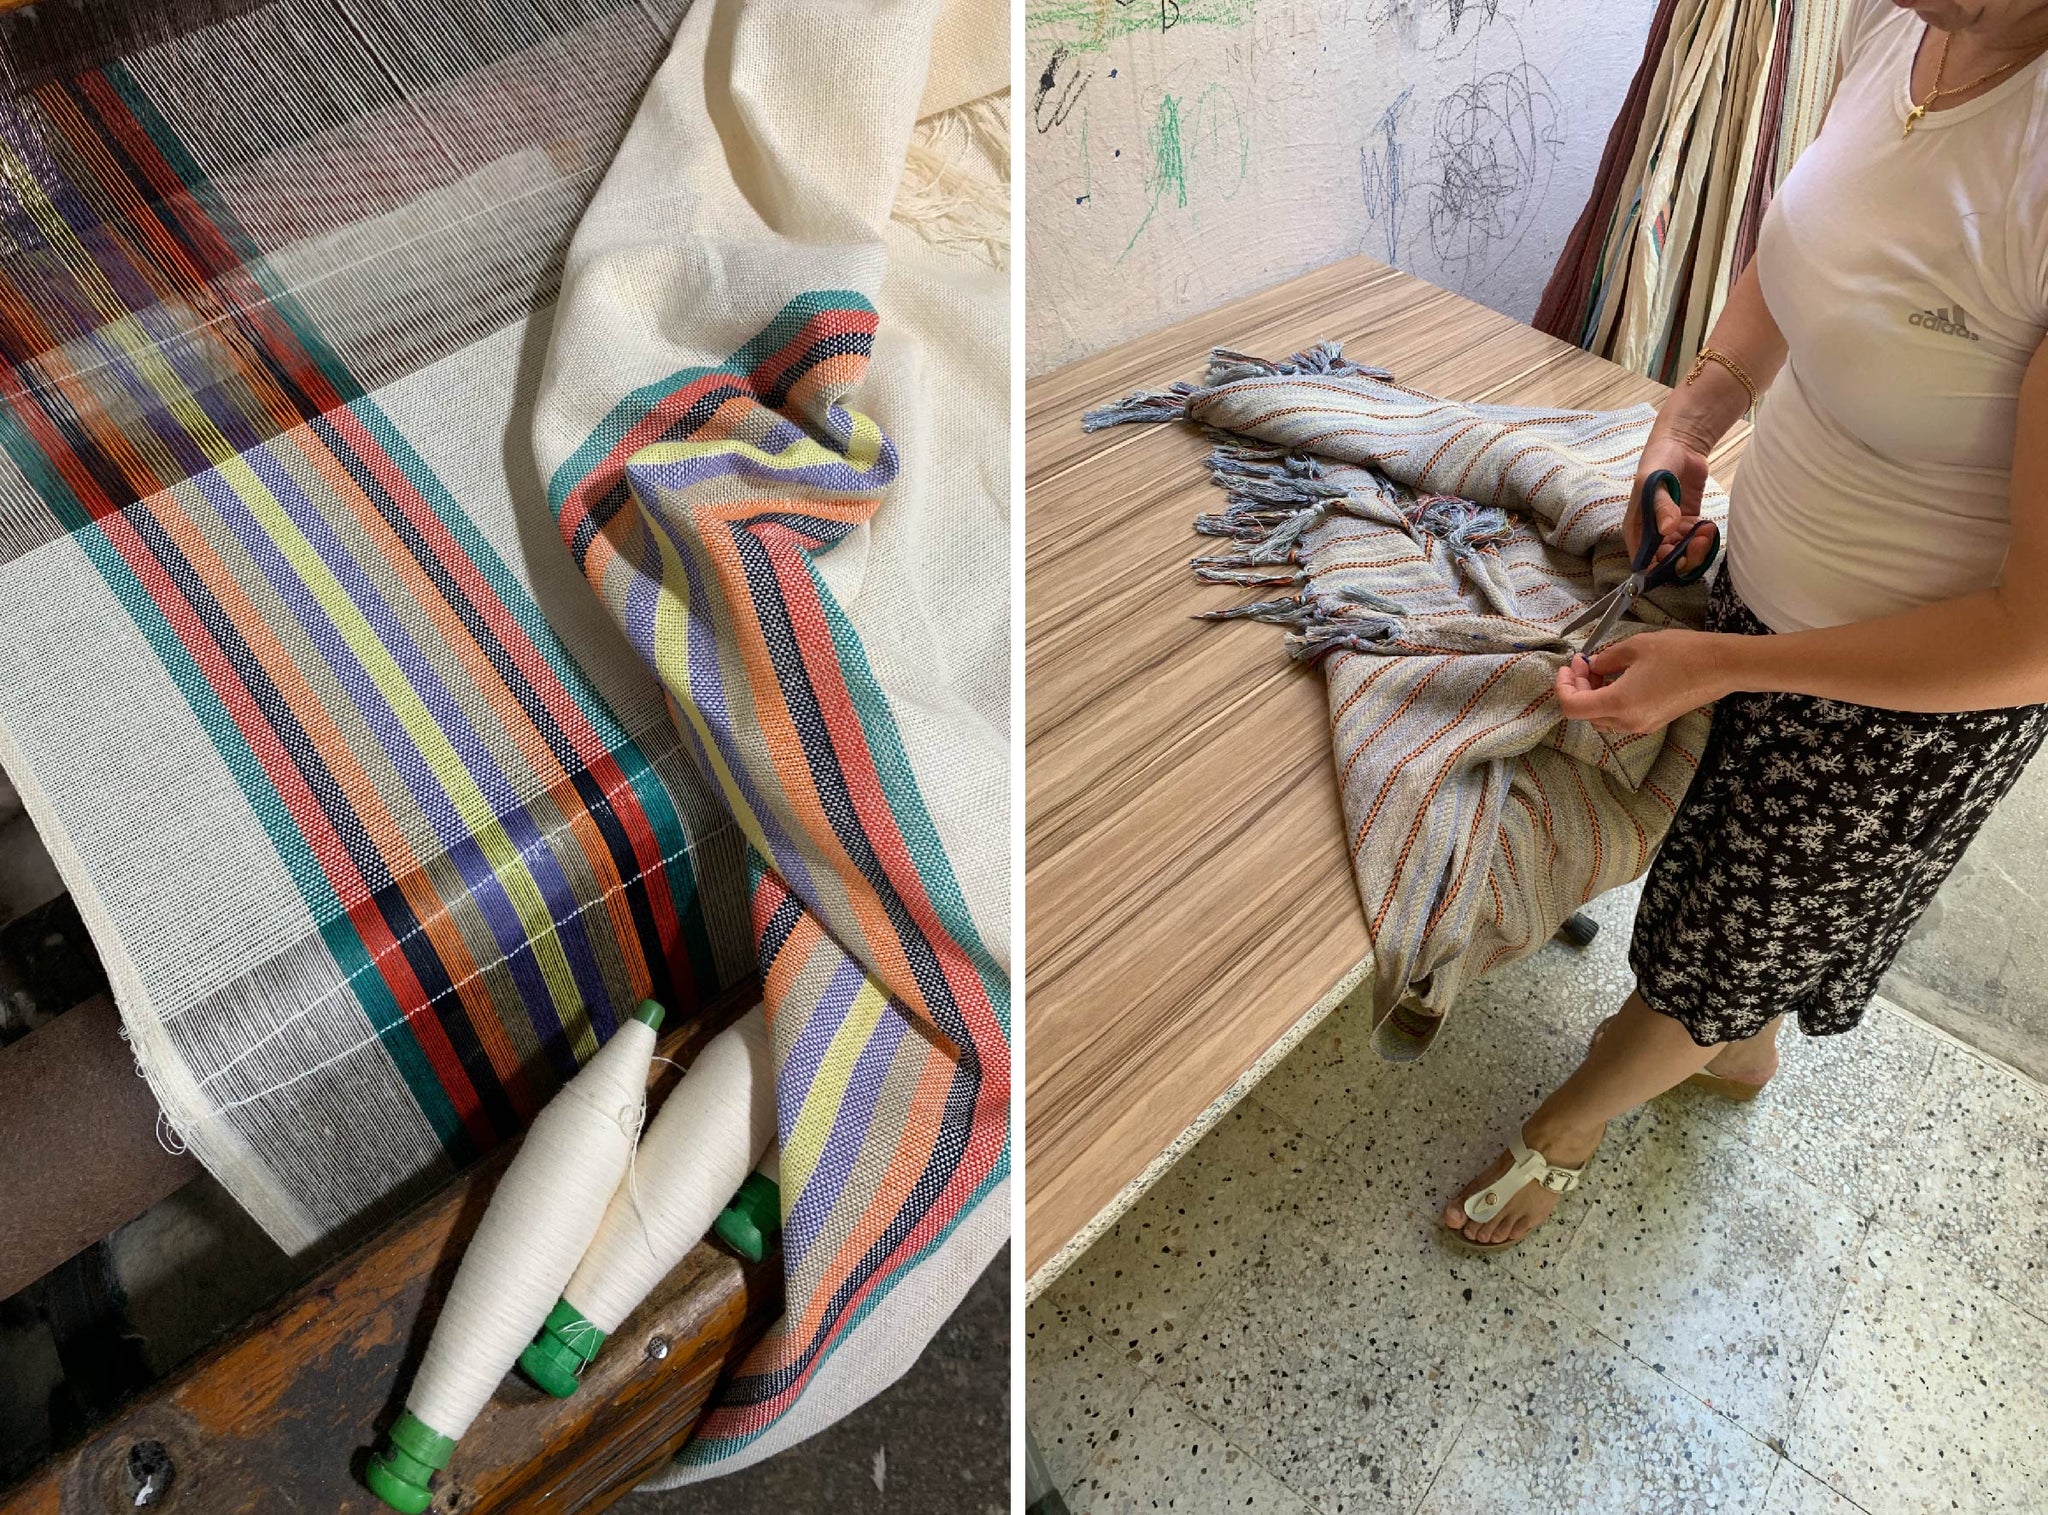 Our weavers creating beautiful towels in Turkey